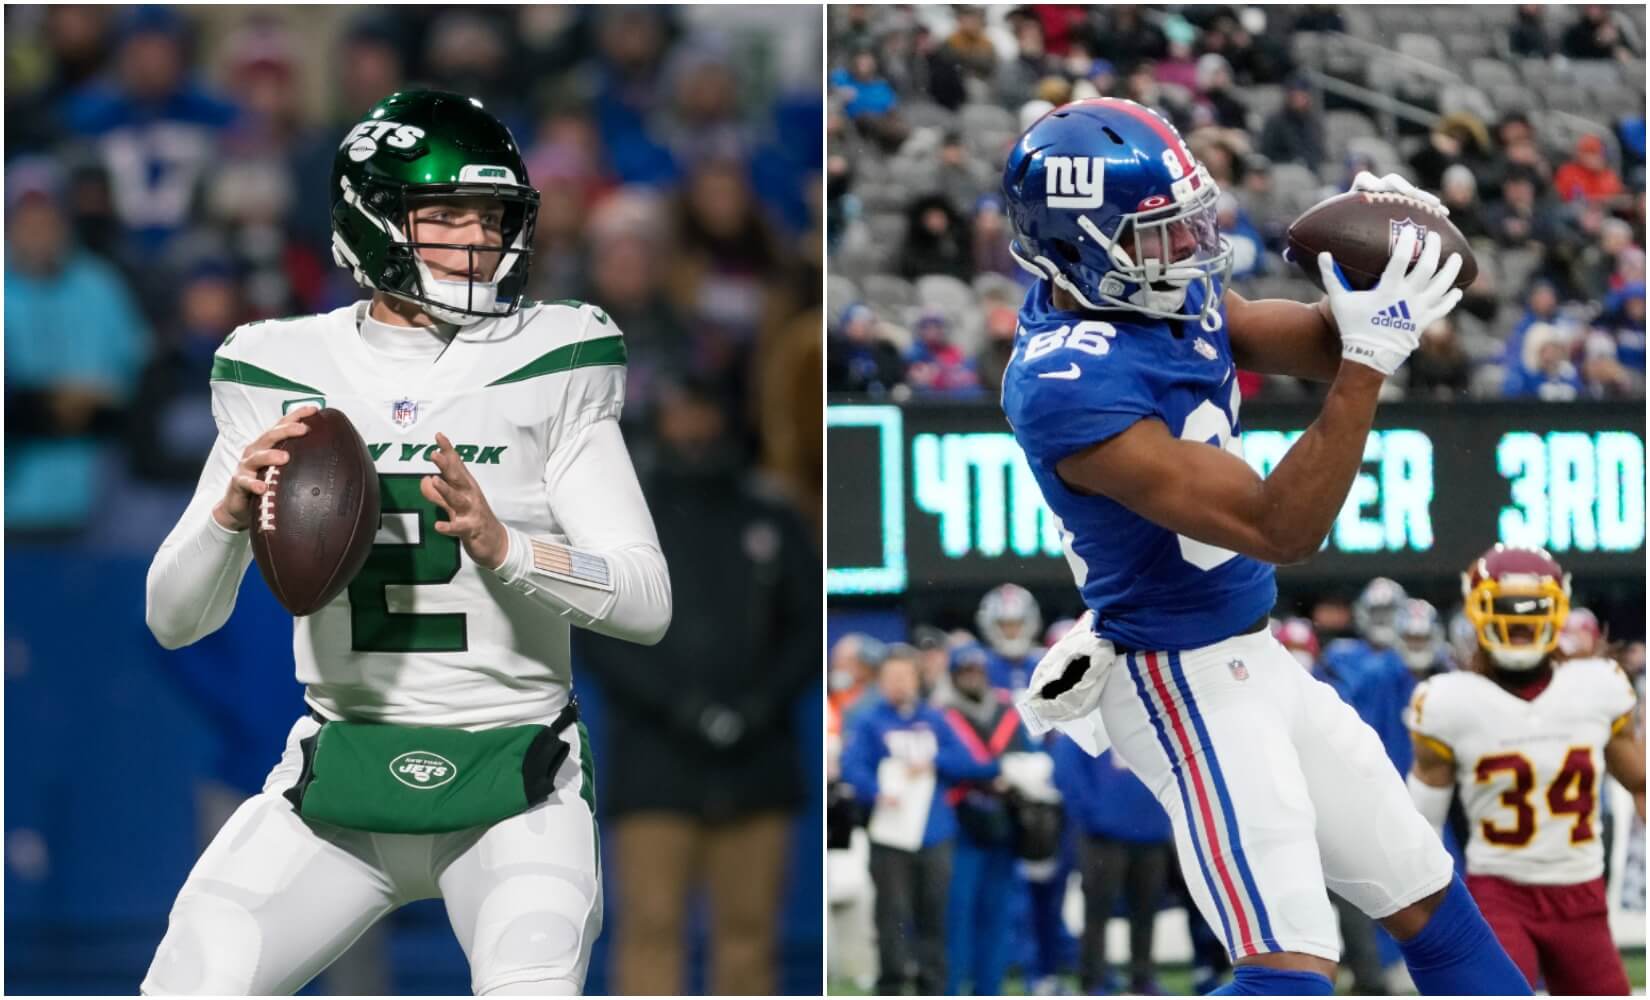 NFL announces scheduled 2022 matchups for Jets and Giants